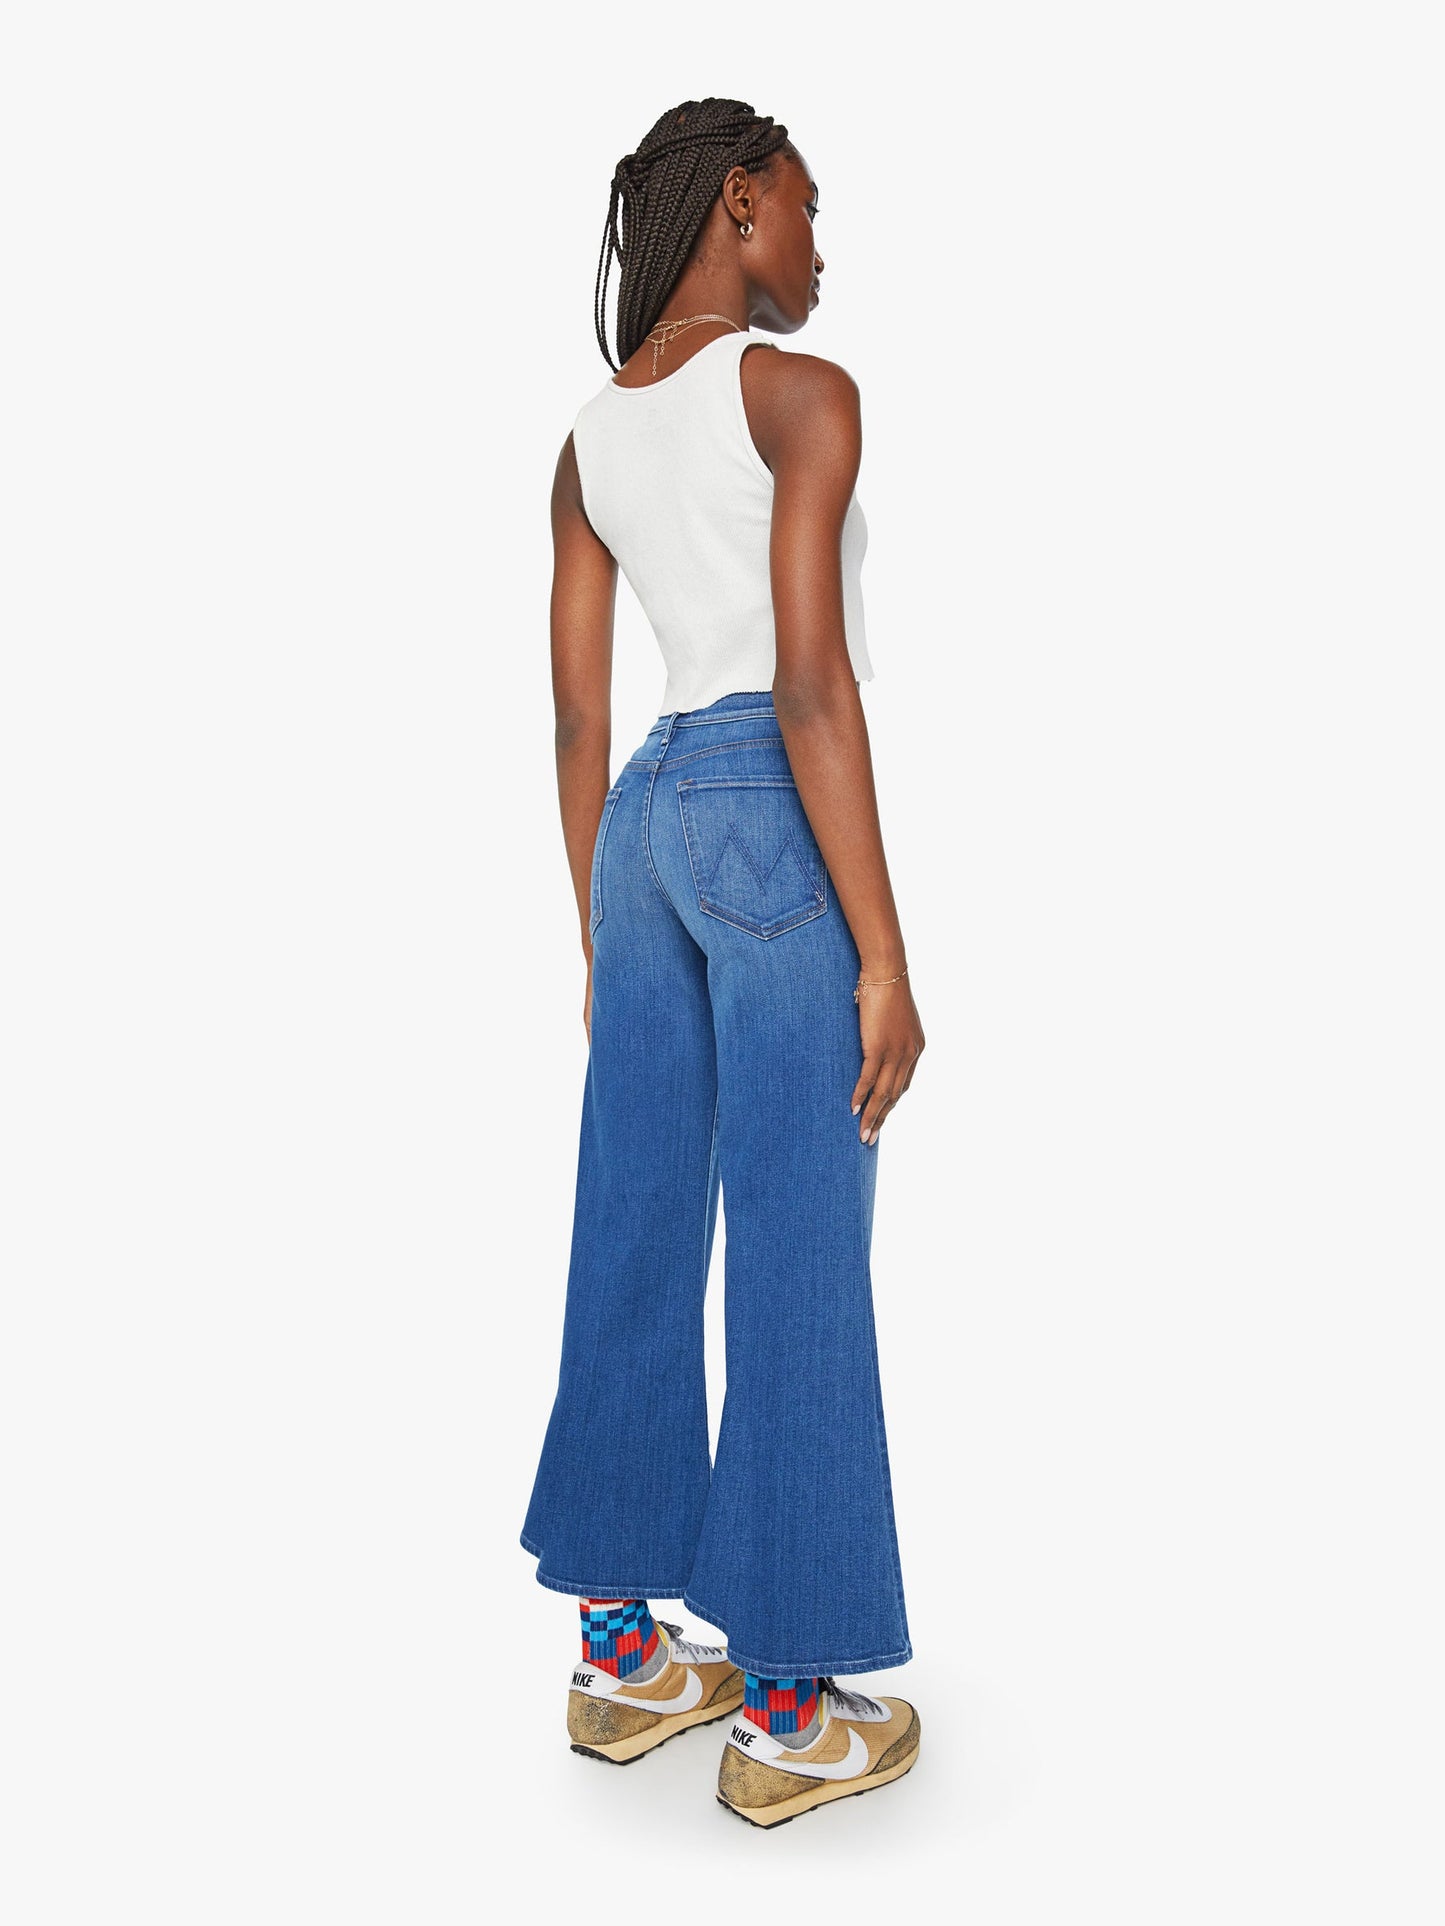 MOTHER Twister Ankle Jeans